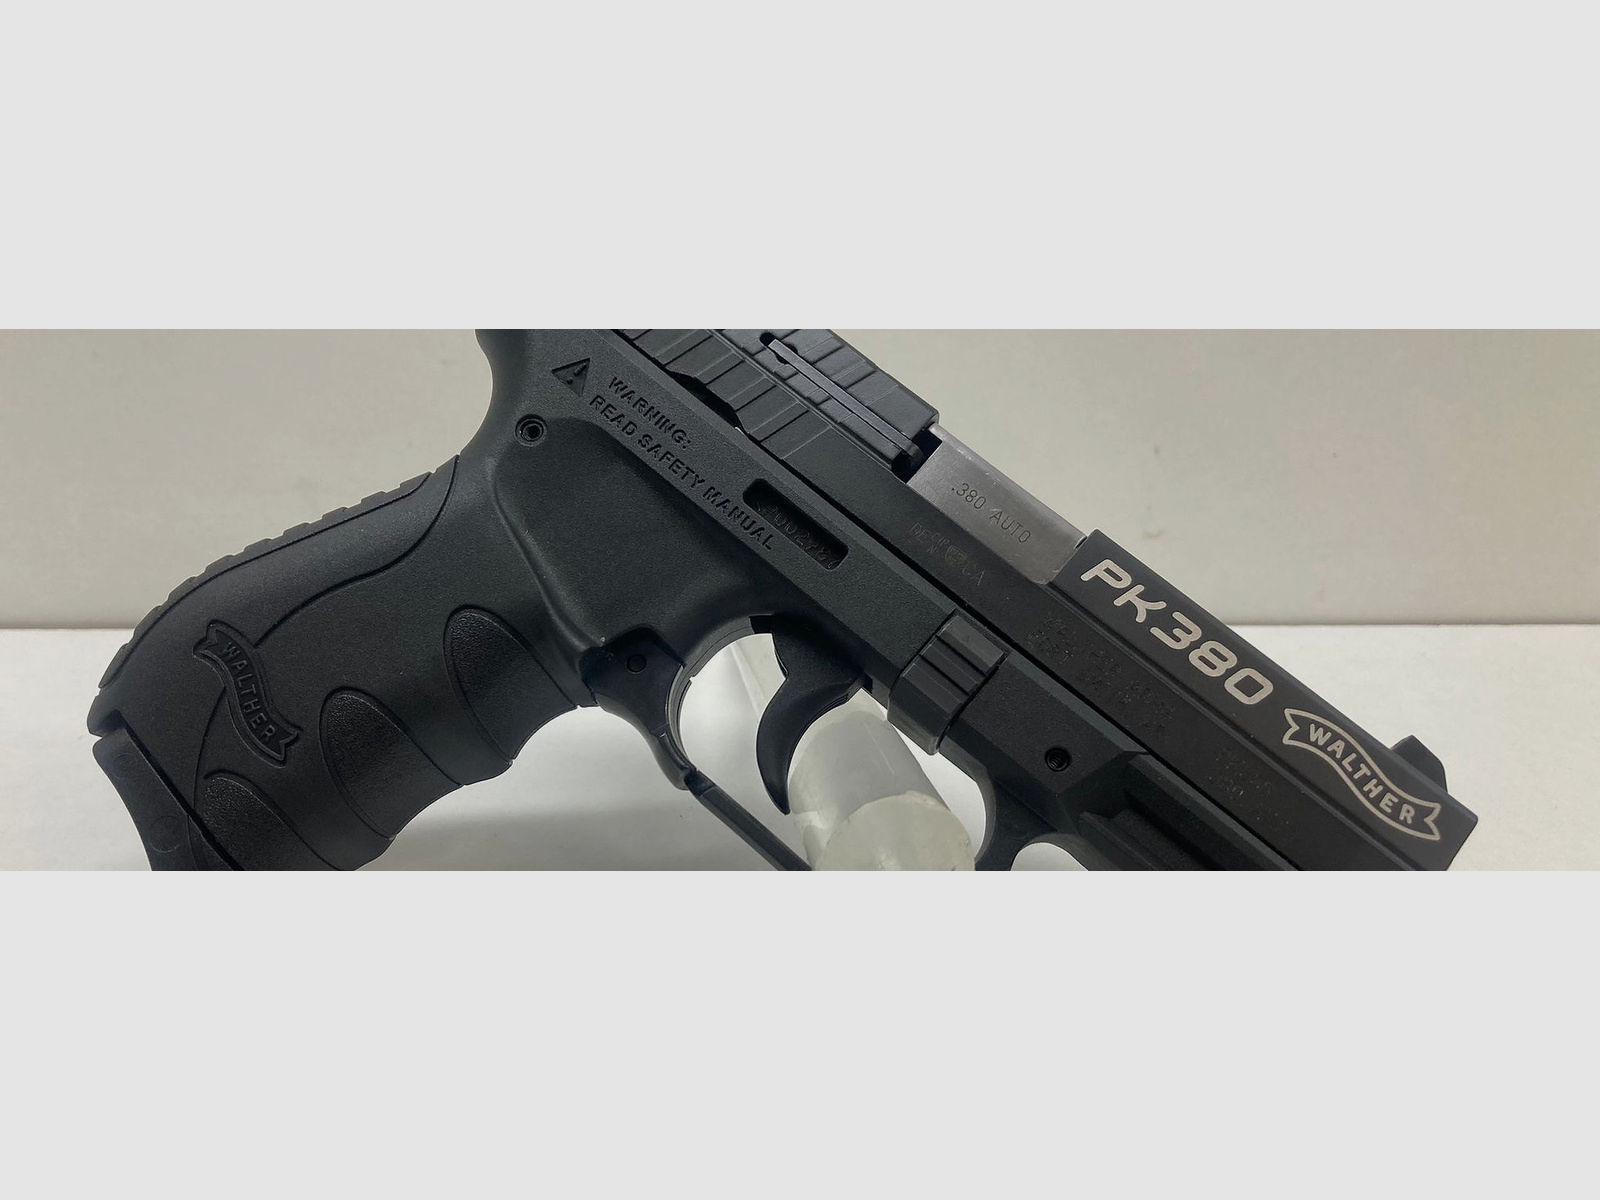 WALTHER PK380